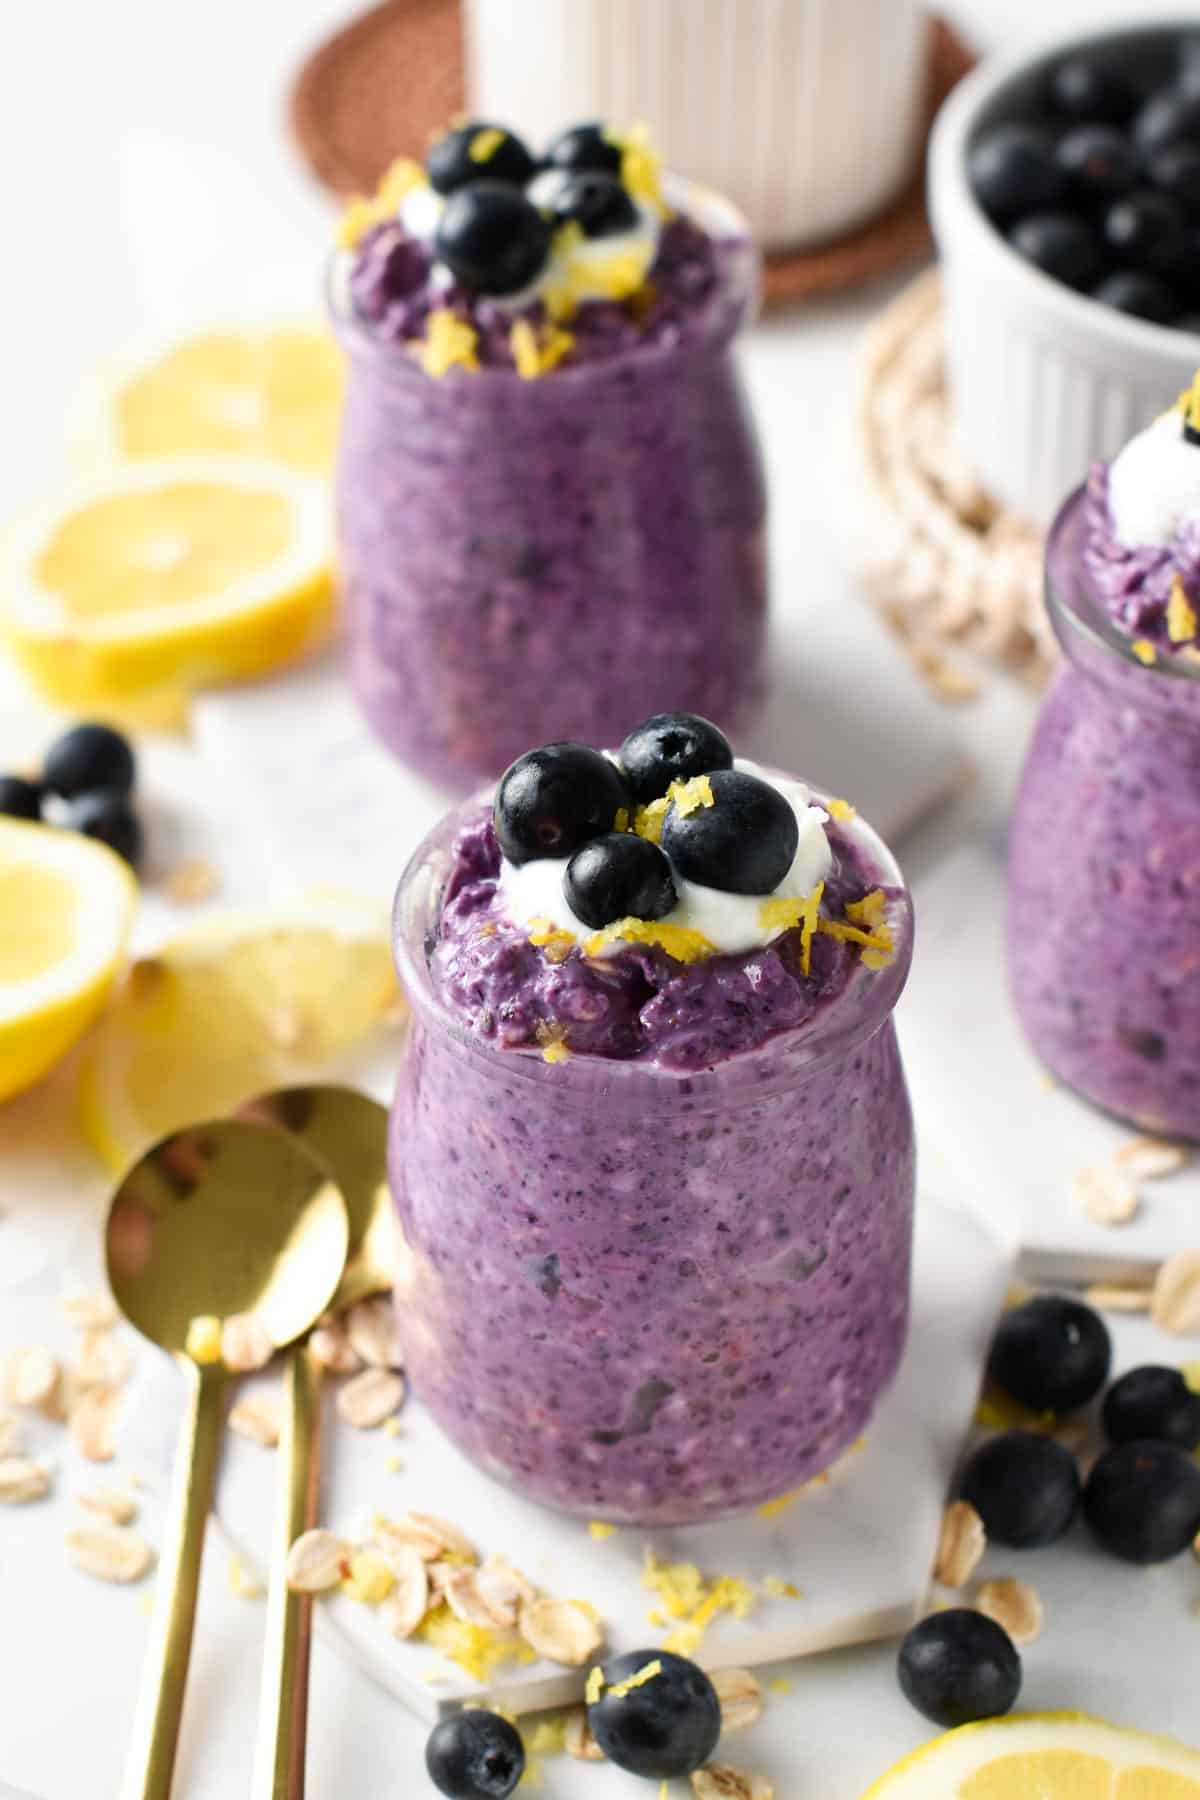 These blueberry overnight oats are a healthy creamy breakfasts packed with anti-inflammatory from blueberries and the most beautiful vibrant natural, purple color.